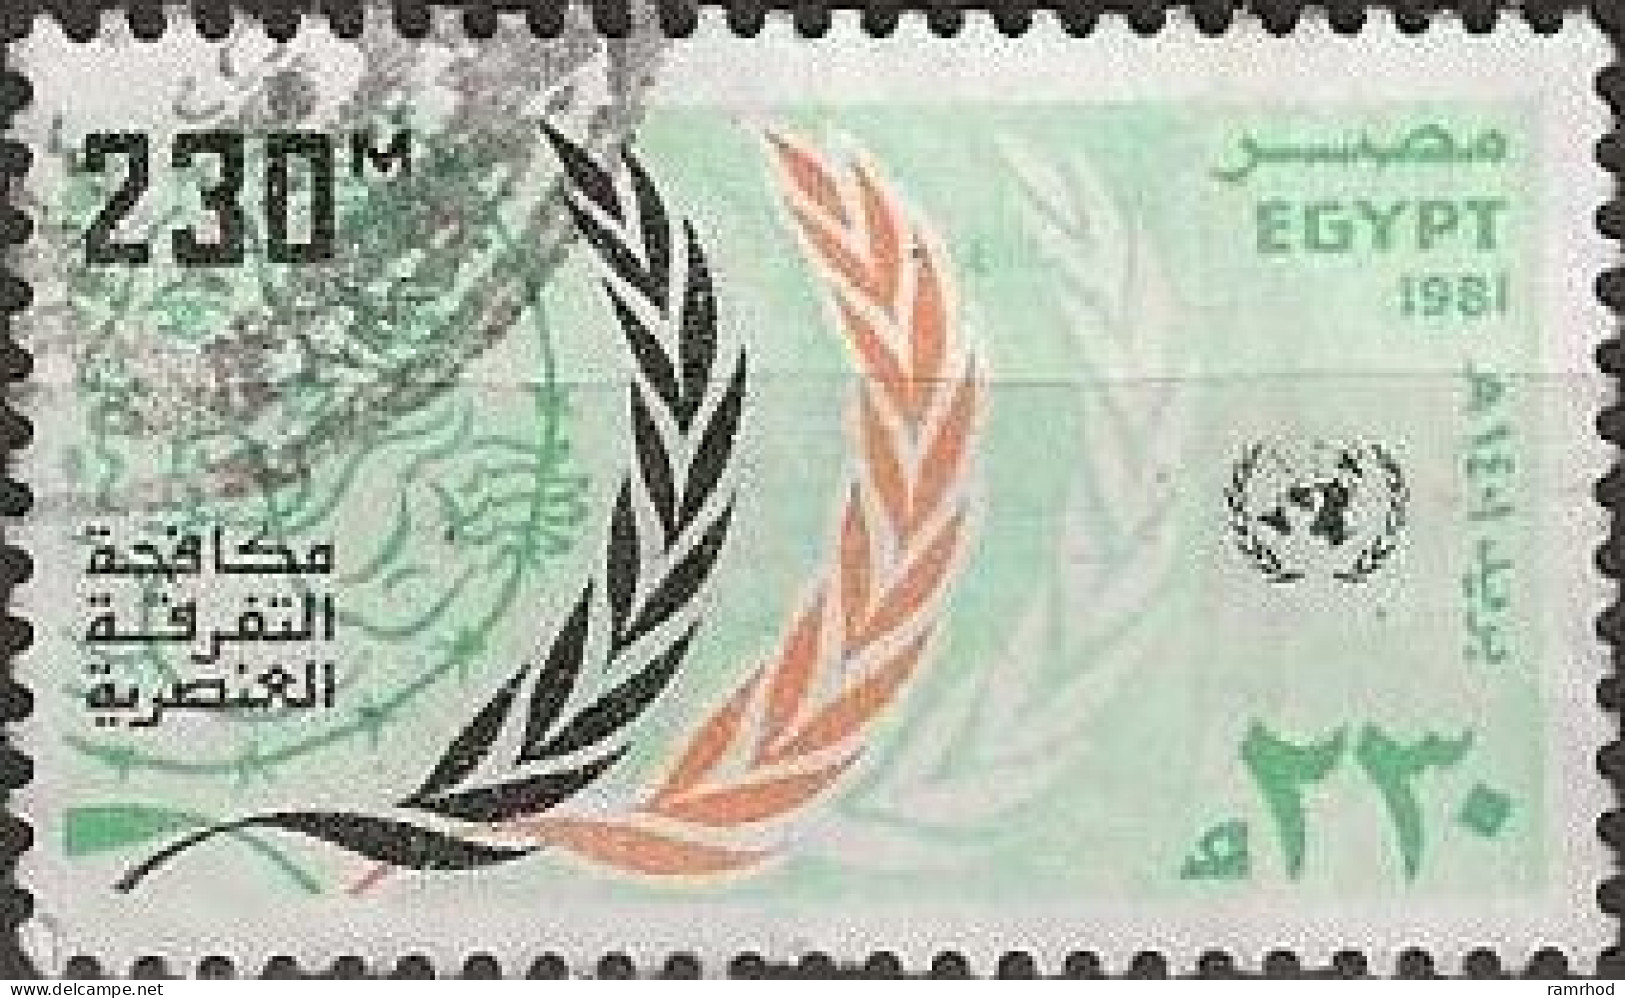 EGYPT 1981 United Nations Day - 230m. Olive Branches (Racial Discrimination Day) FU - Used Stamps